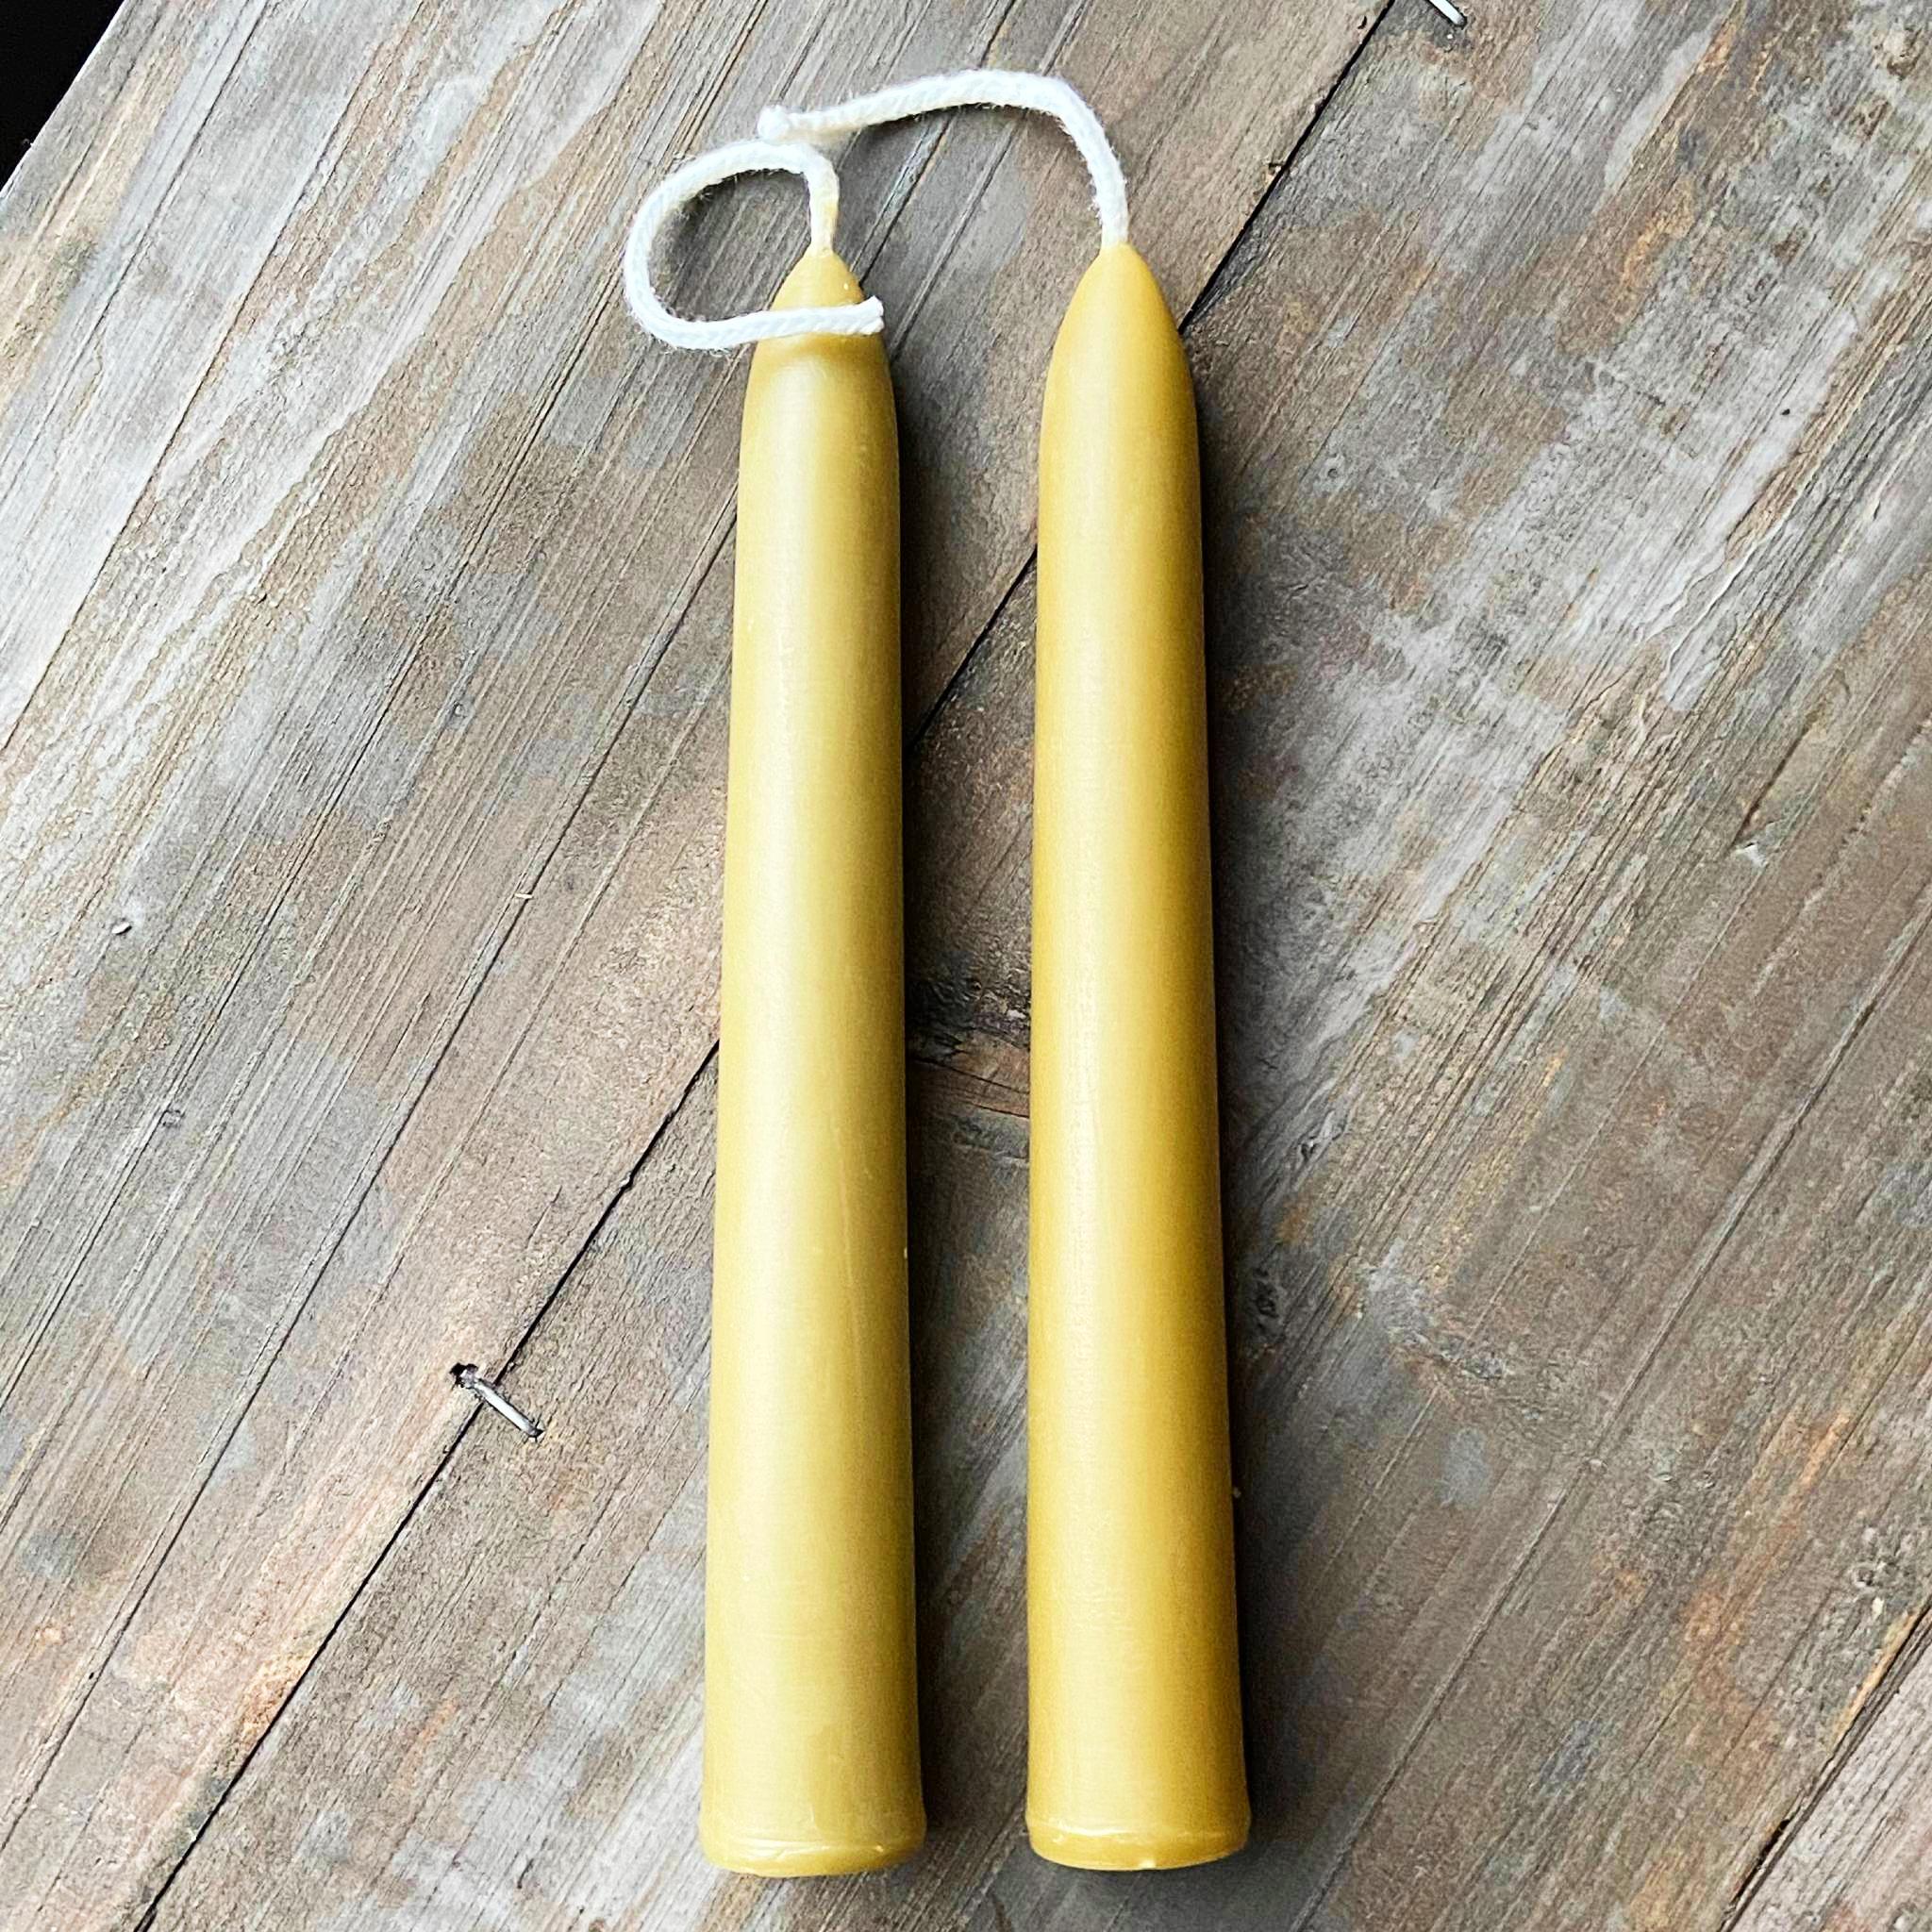 Bayberry taper candles 6" pair from Mill Creek Apiary